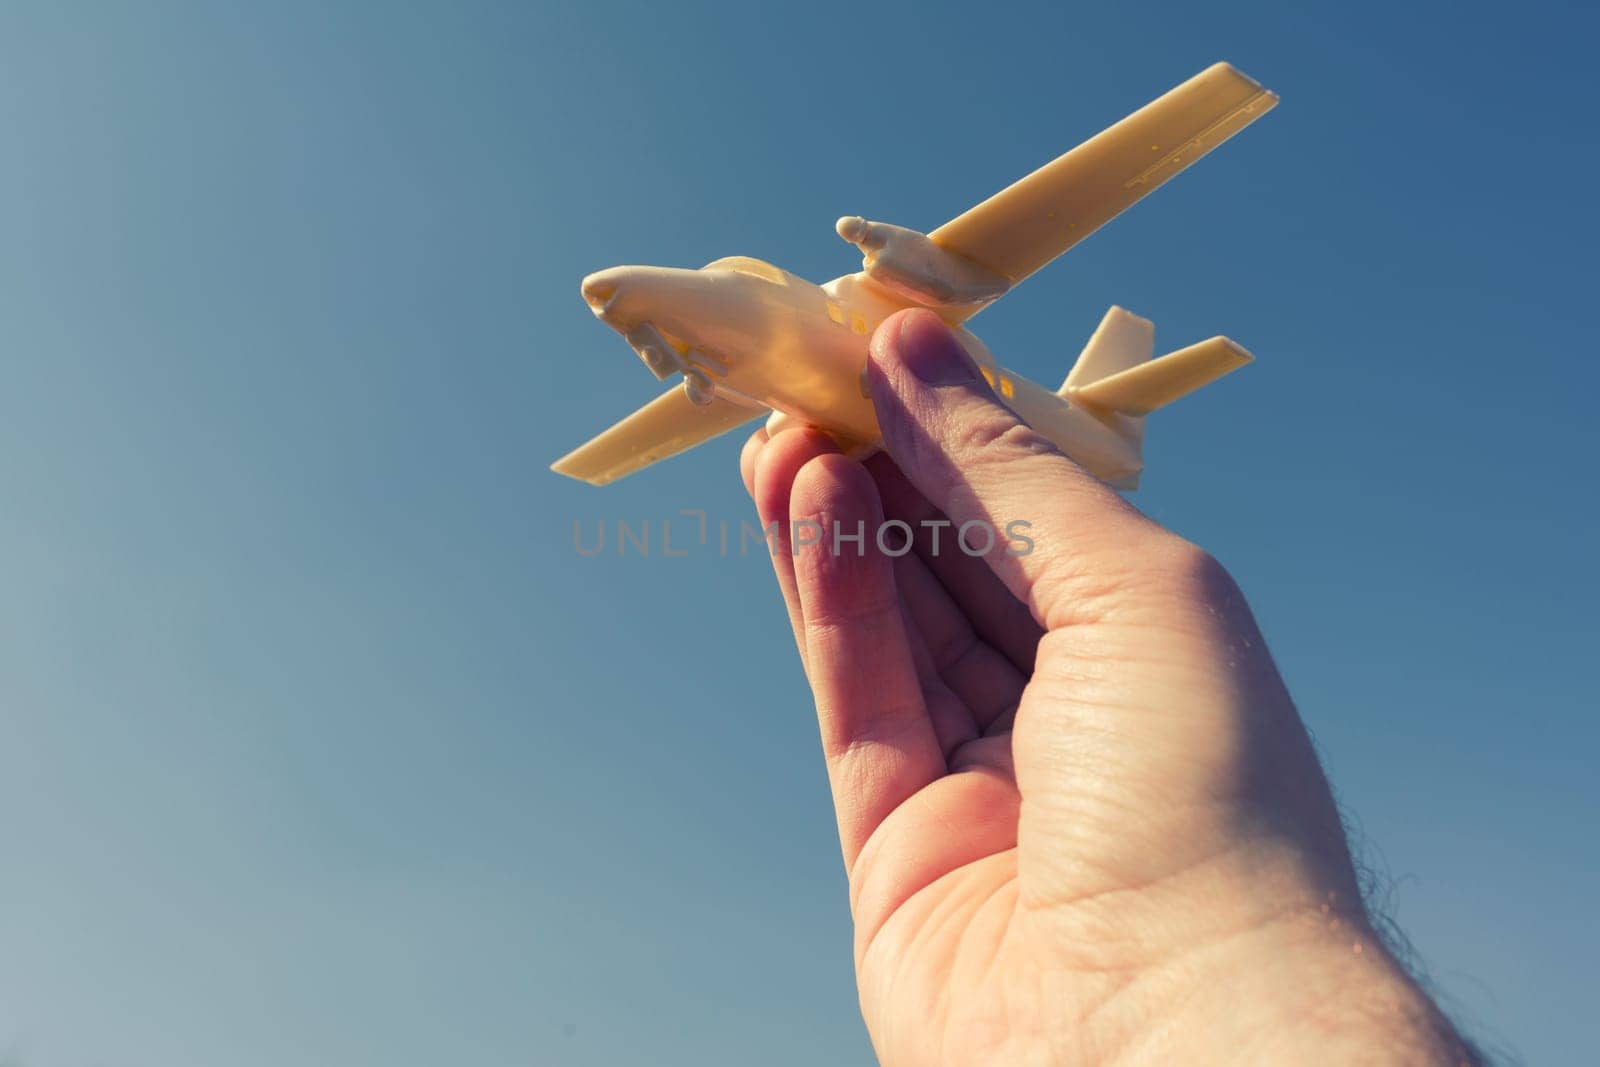 close up photo of male hand holding toy airplane against blue sky. by zartarn